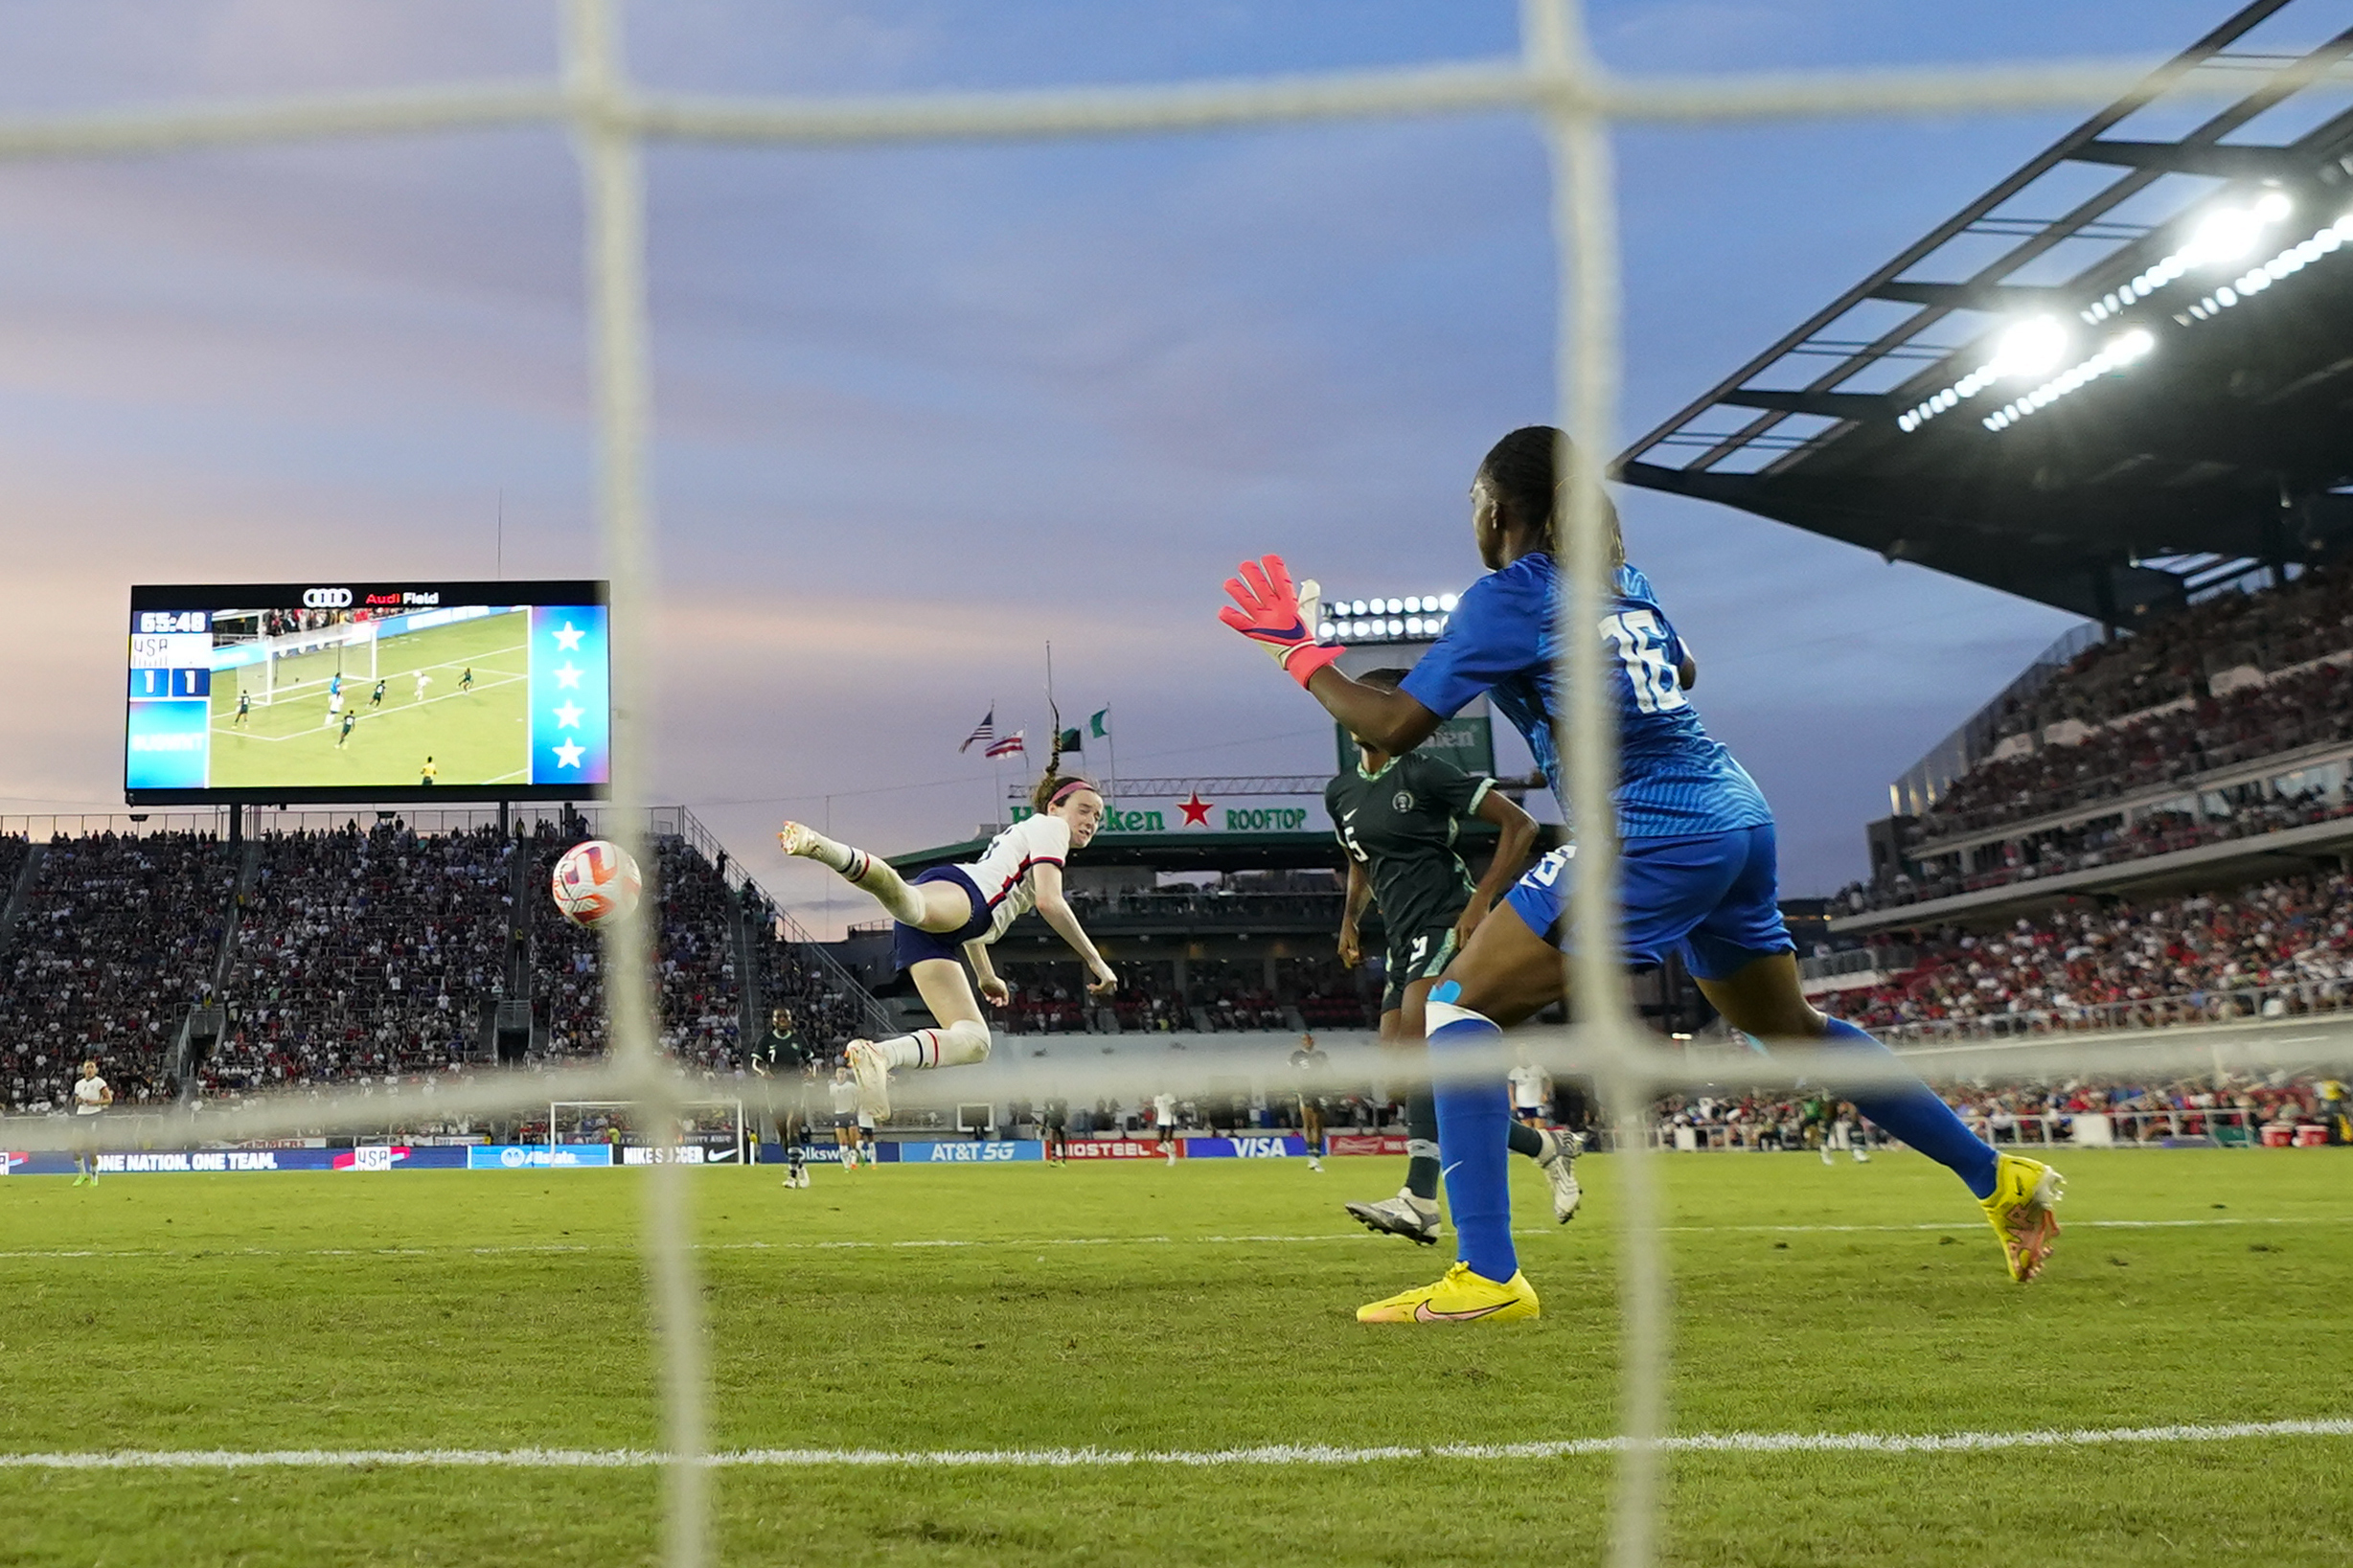 United States' Rose Lavelle connects on a header while scoring a goal.